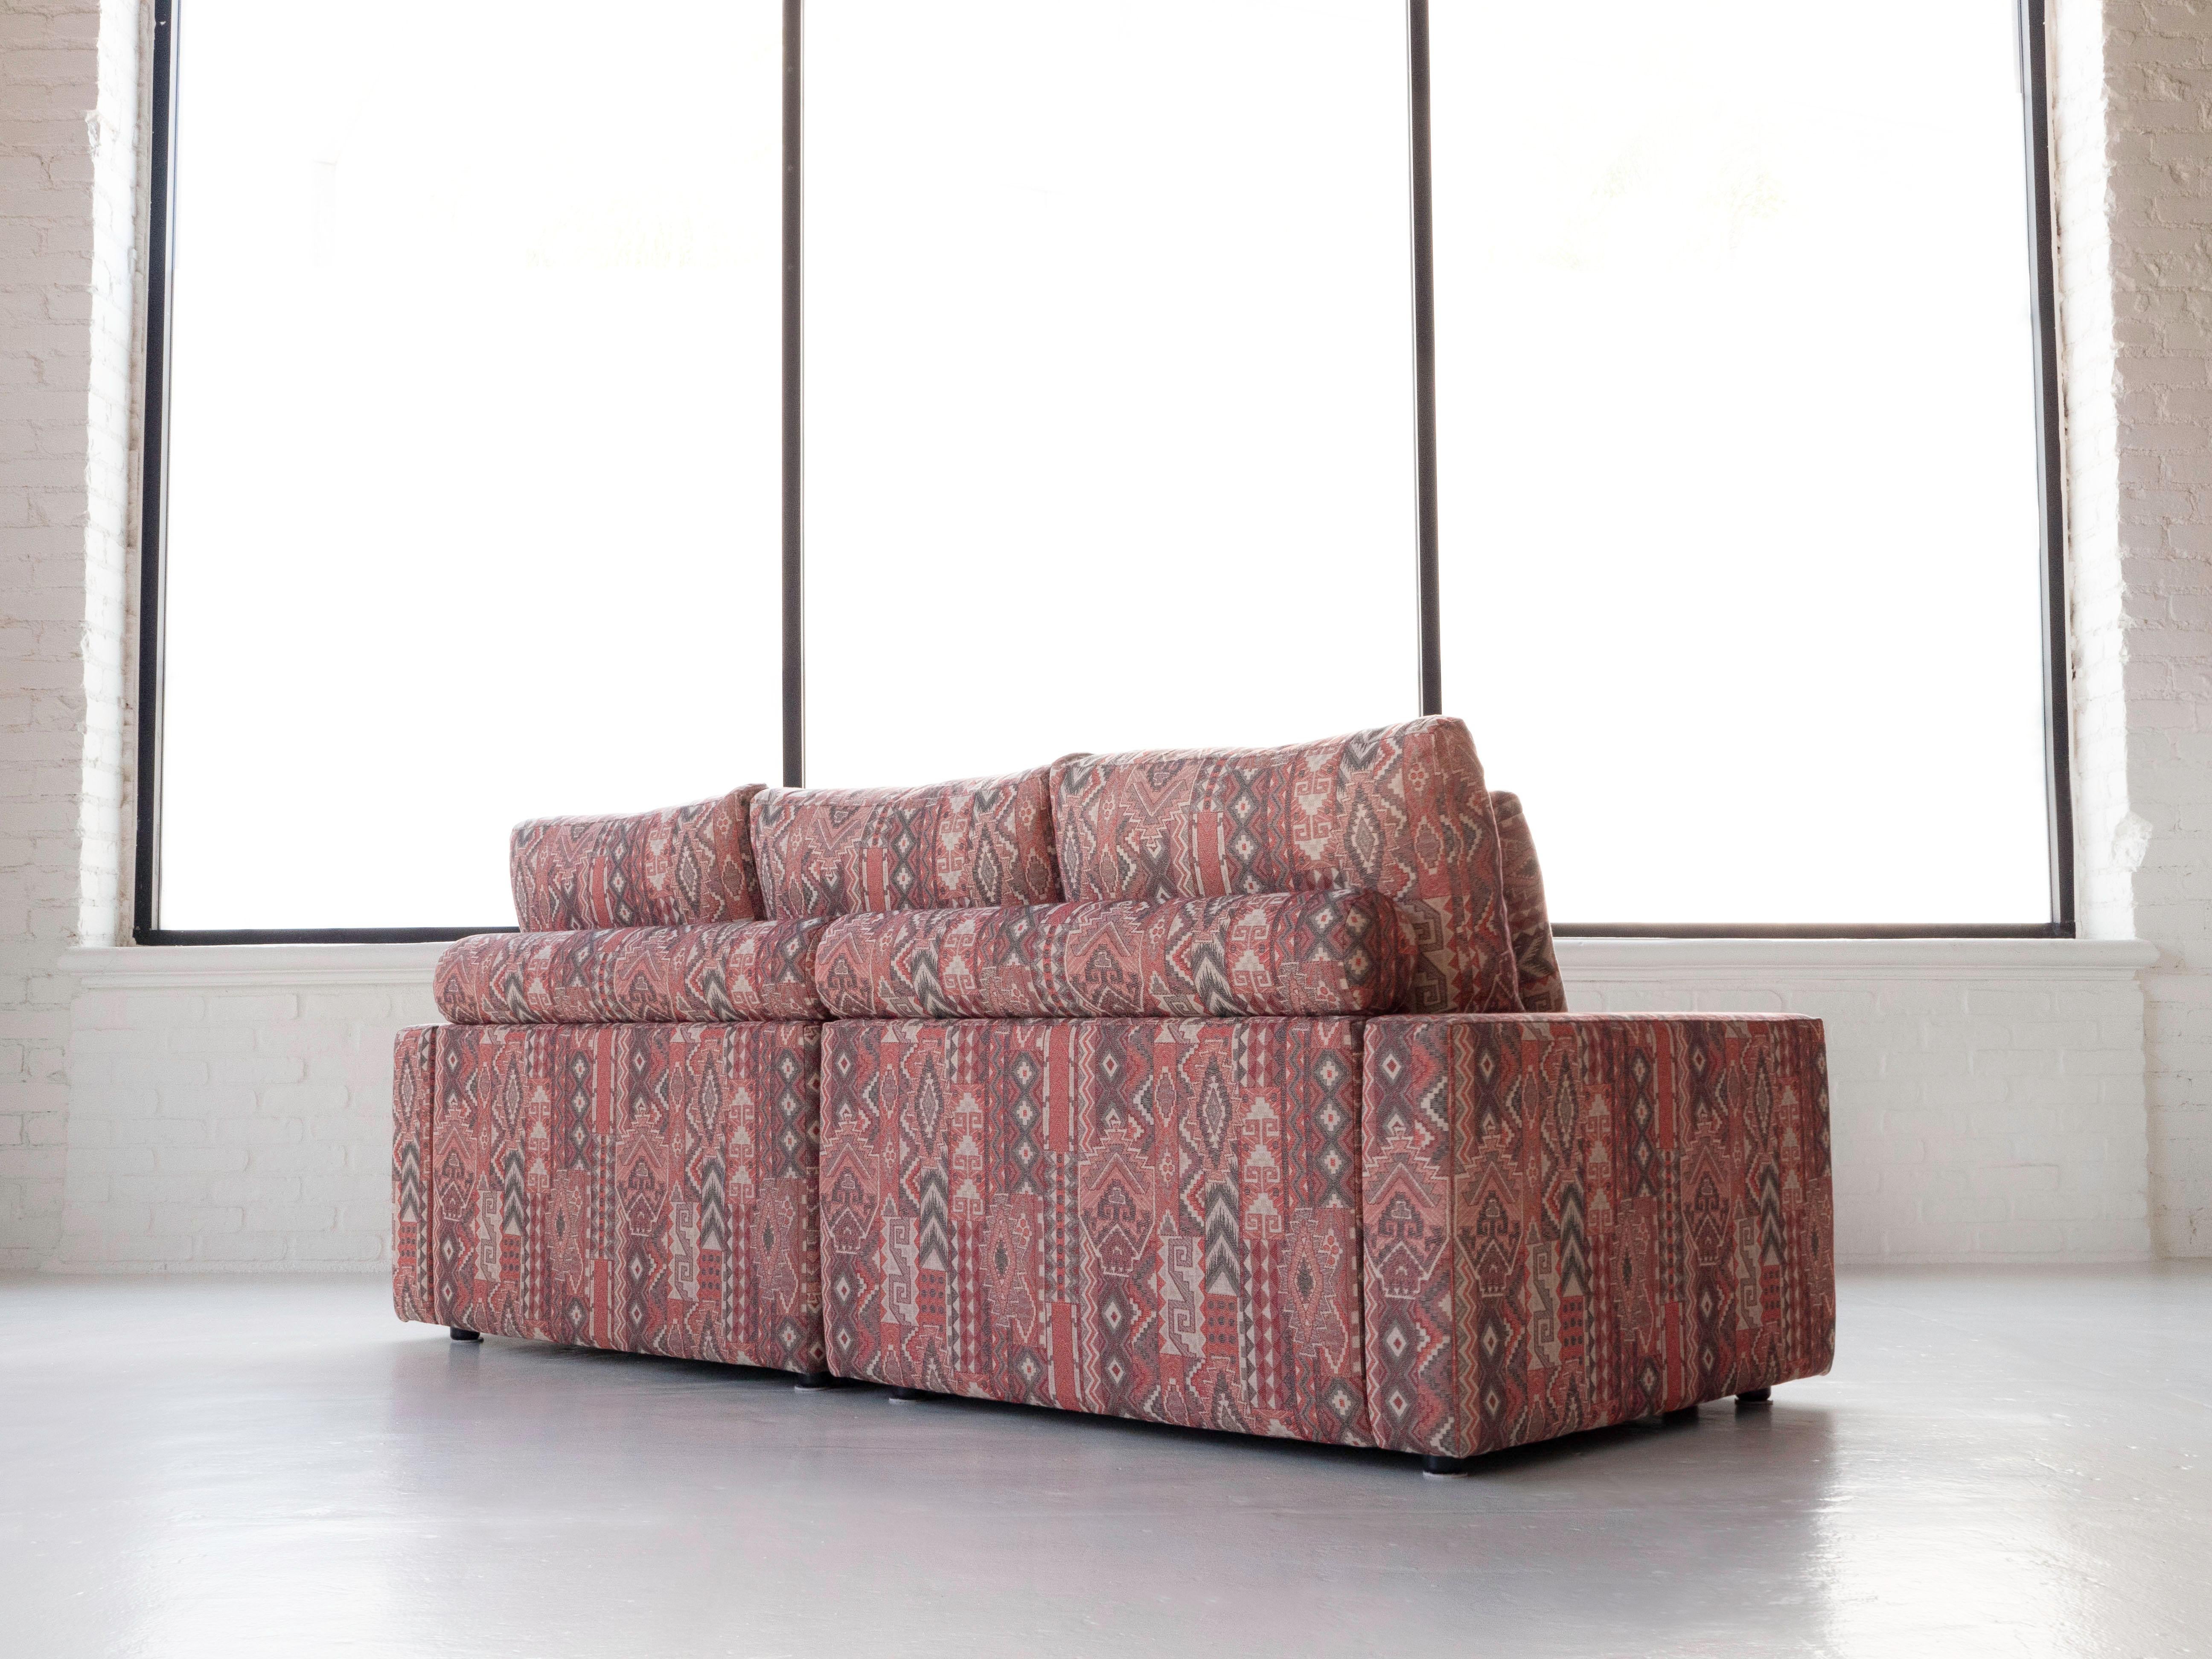 Roche Bobois three-seat sofa & ottoman by designer Hans Hopfer in like new condition. The sofa was manufactured in 1987 per tags shown underneath. Original 100% cotton fabric with an intricate pattern. The back cushions are down filled. The seat